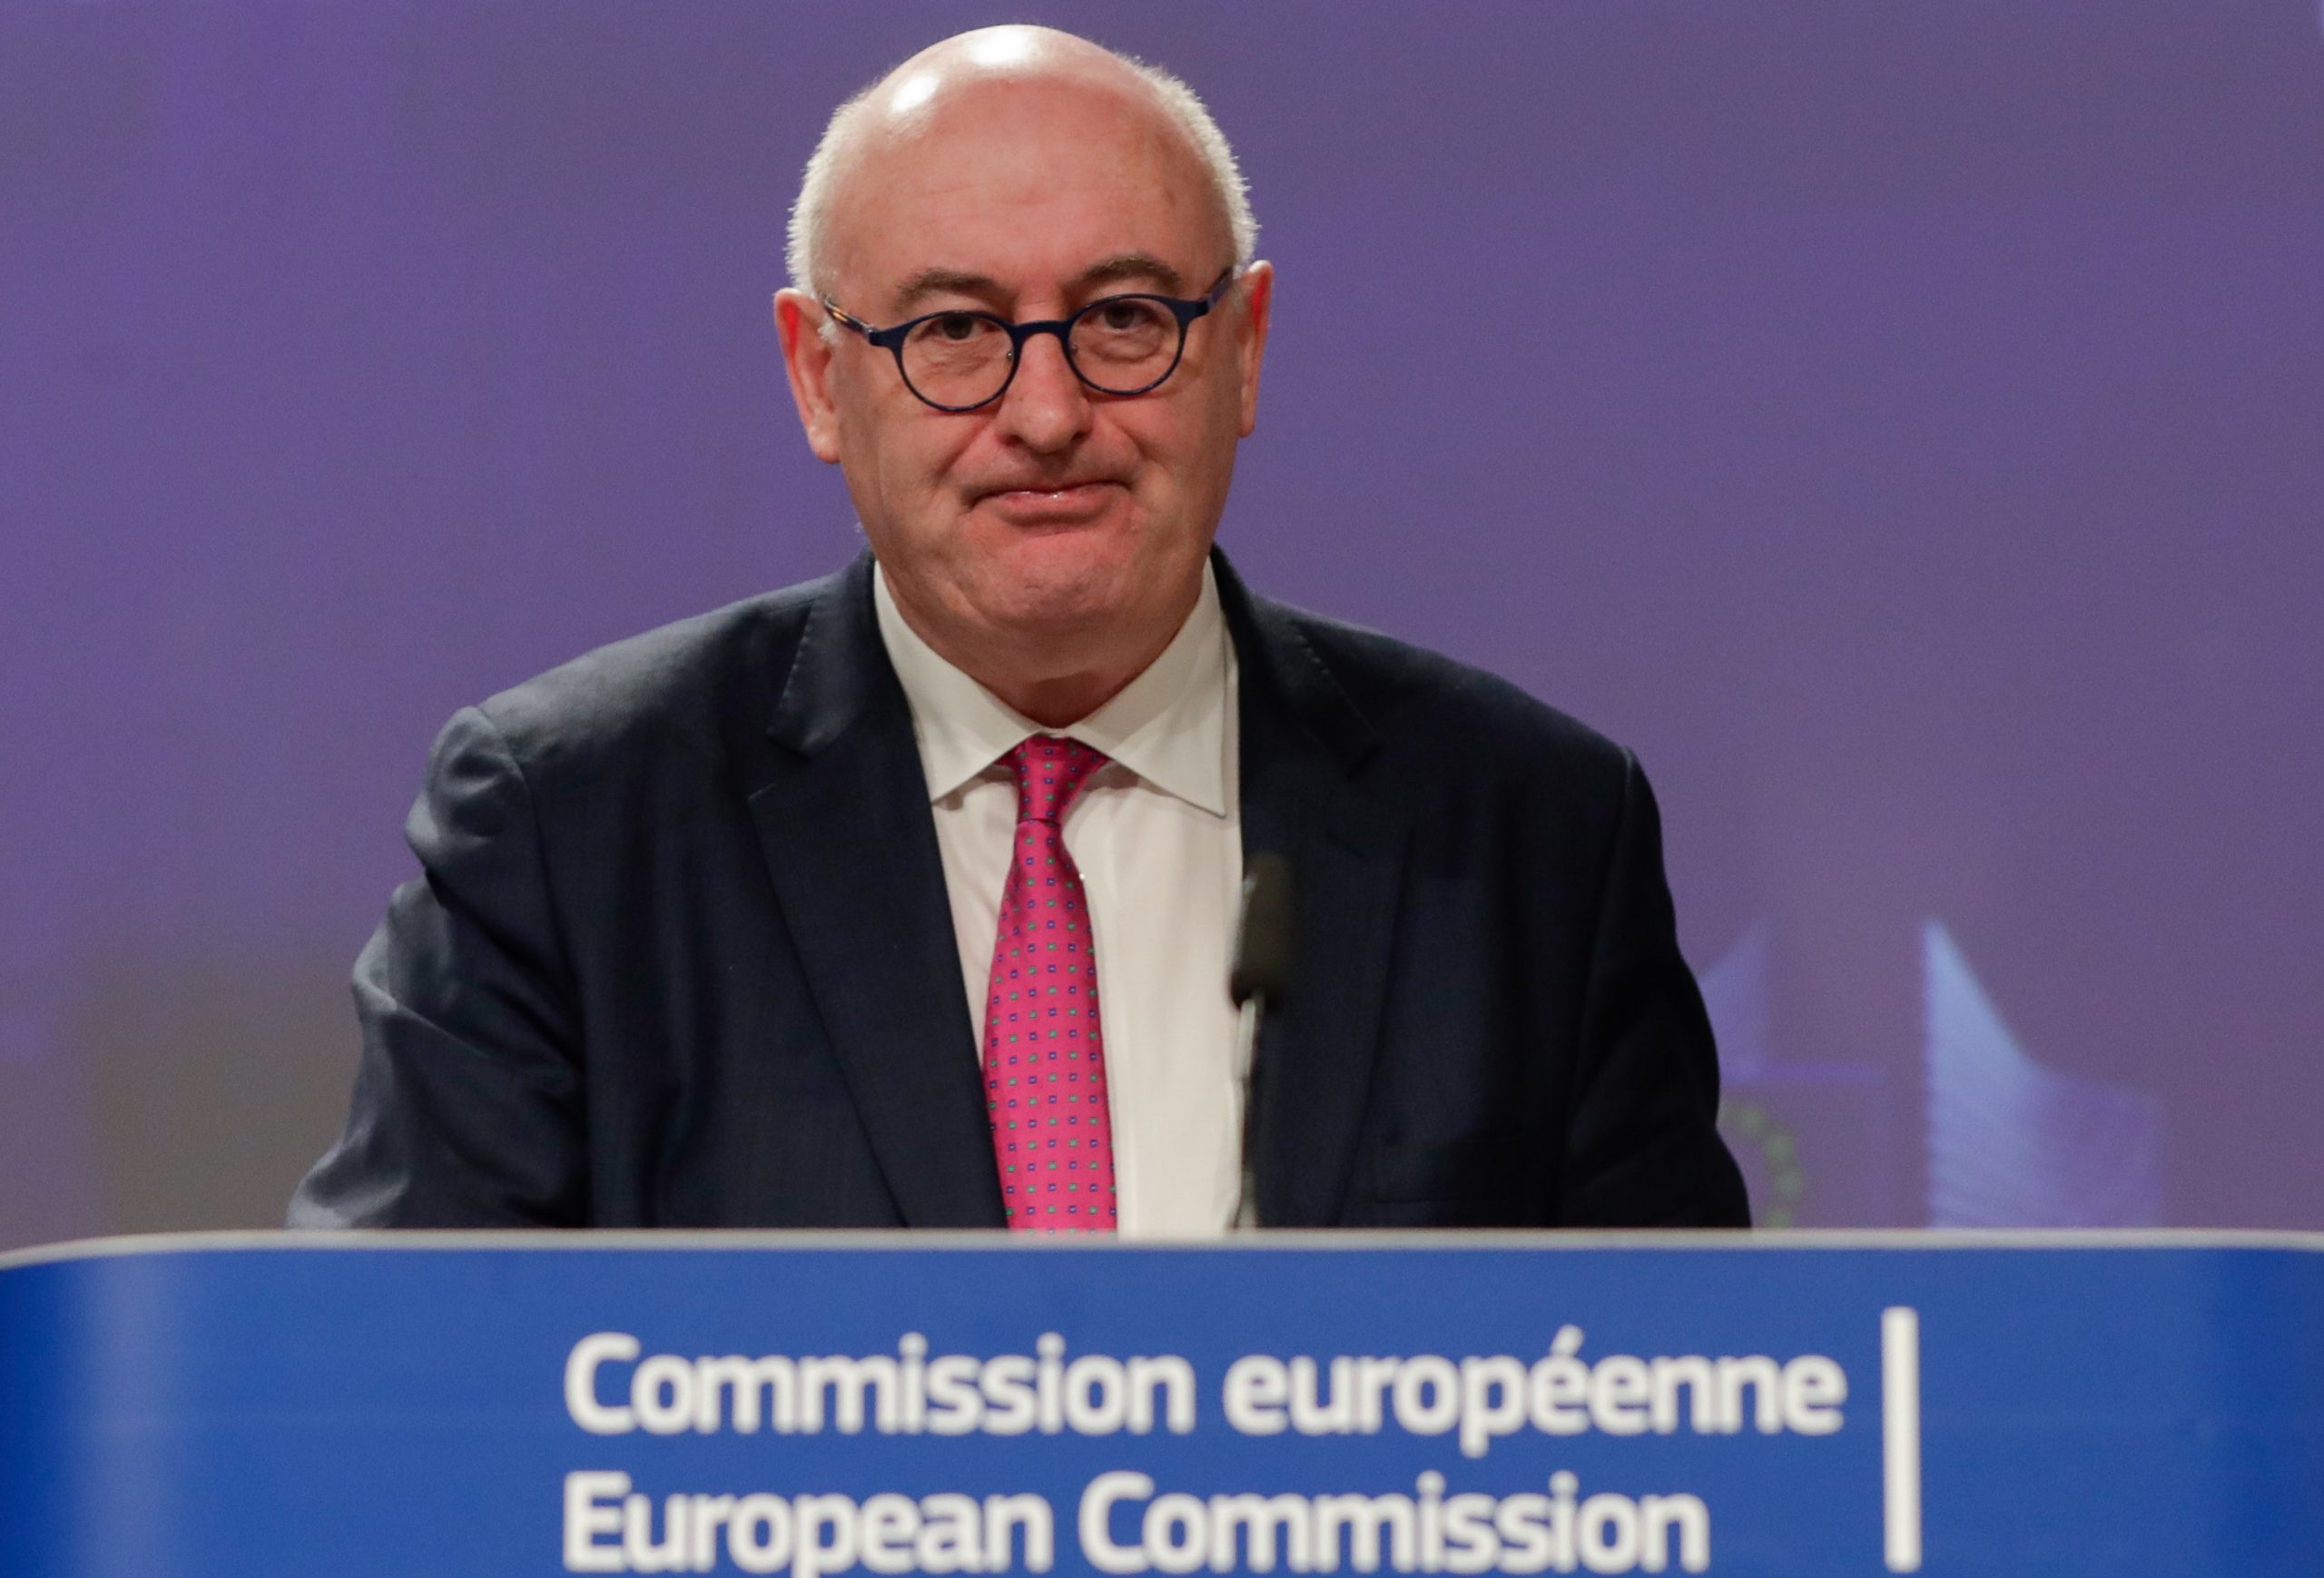 epa08627452 (FILE) - European Commissioner for Trade Phil Hogan gives a press conference in Brussels, Belgium, 12 December 2019 (reissued 26 August 2020). Hogan was was criticised for allegedly breaching coronavirus lockdown restrictions in the Republic of Ireland as he attended a golf dinner with more than 80 people on 19 August.  EPA/STEPHANIE LECOCQ